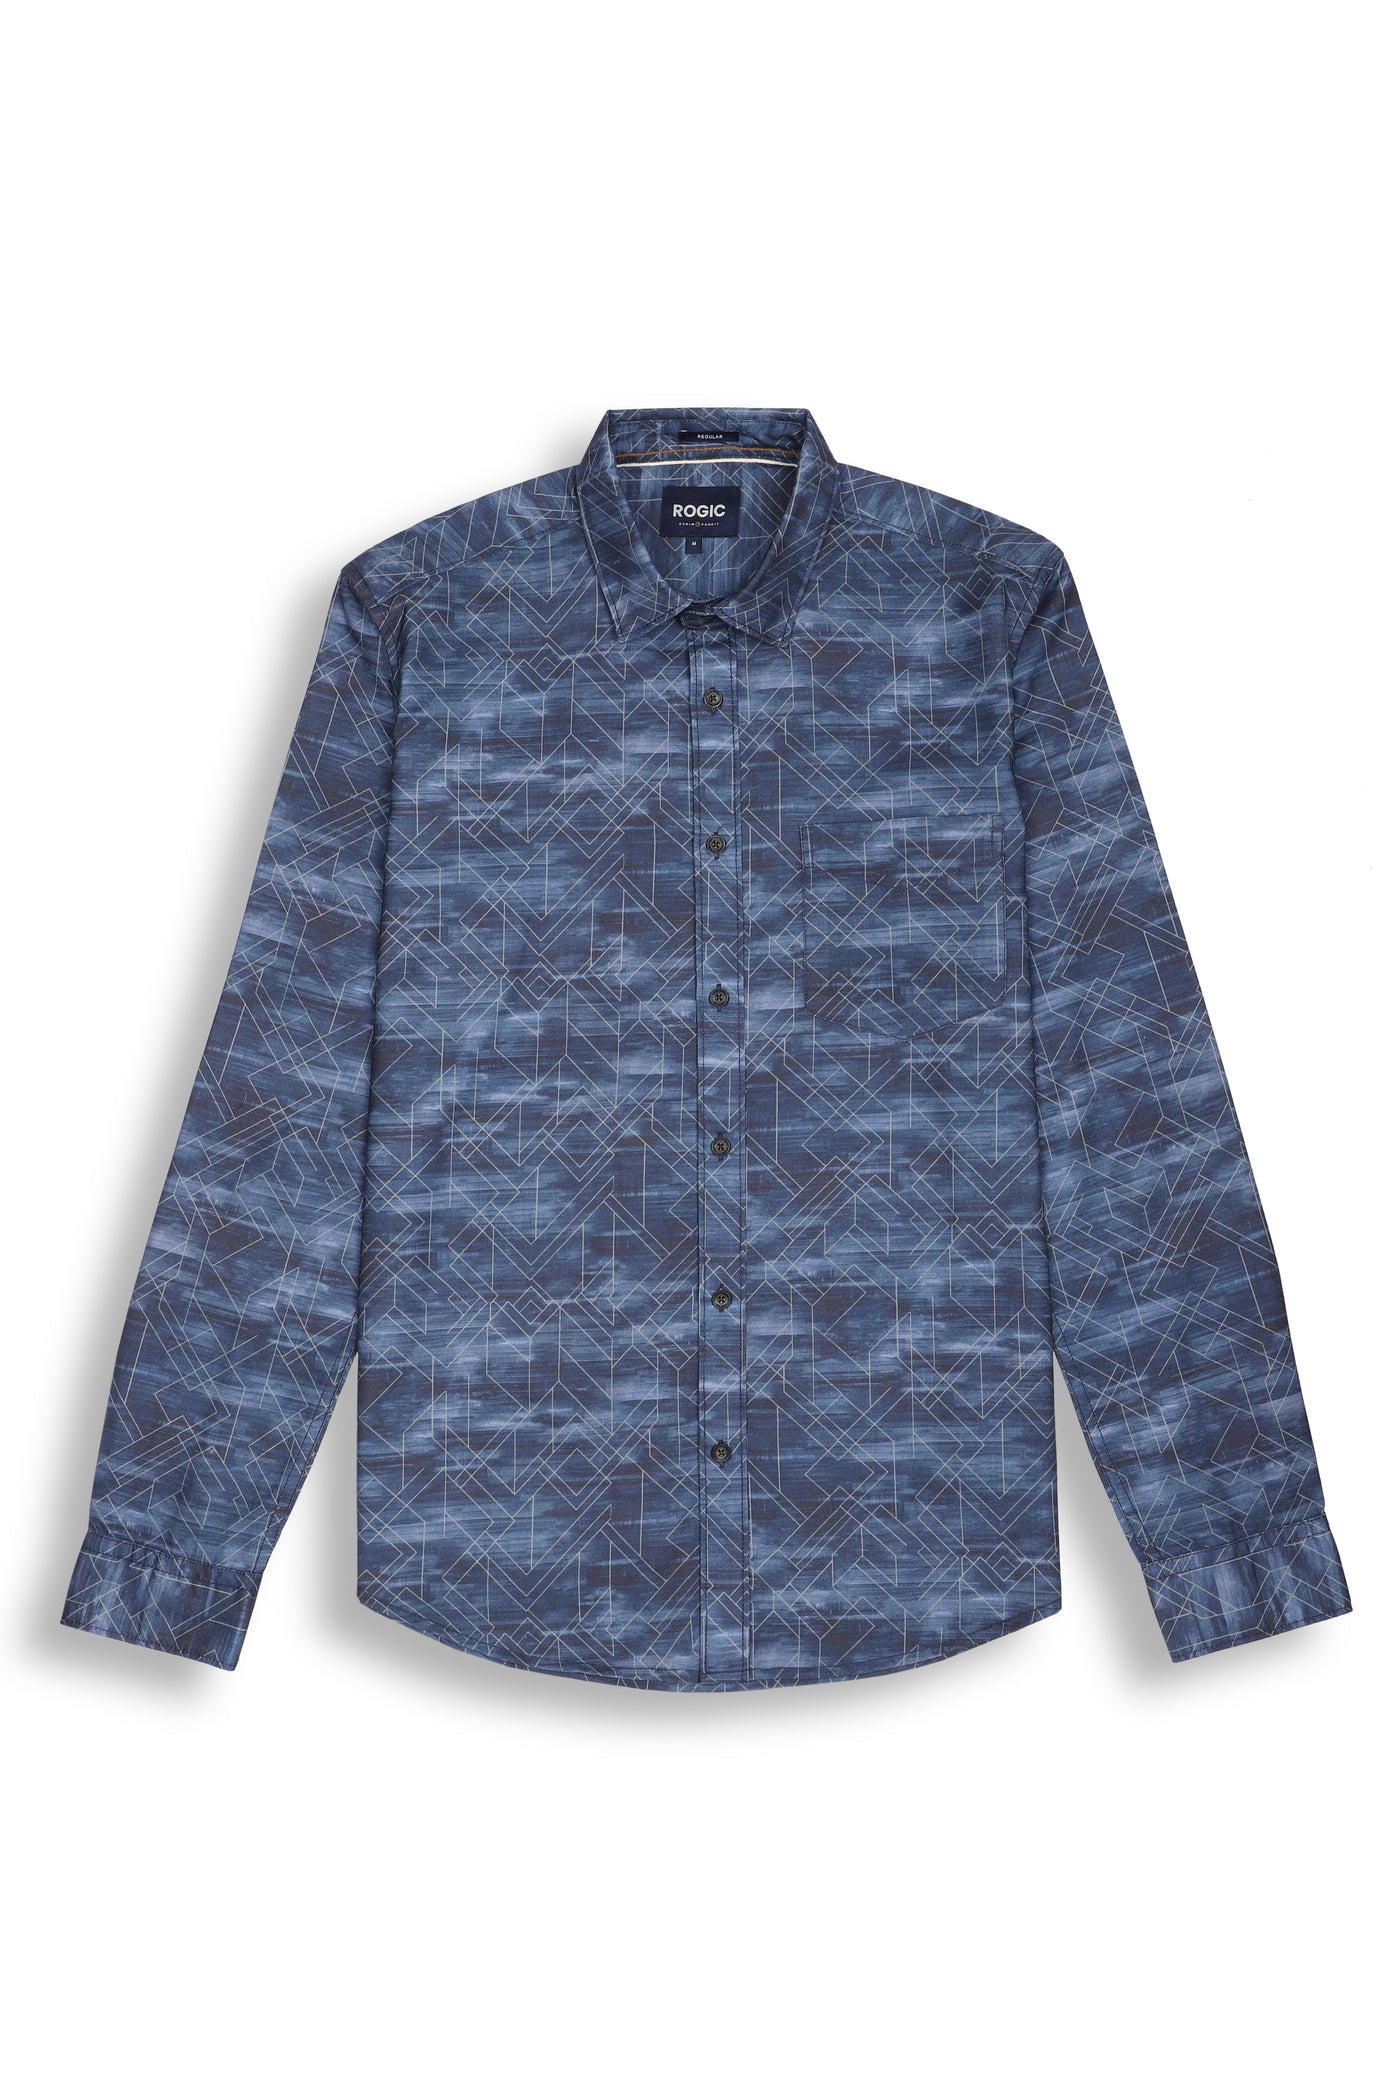 ABSTRACT PRINTED SHIRT IN BLUE